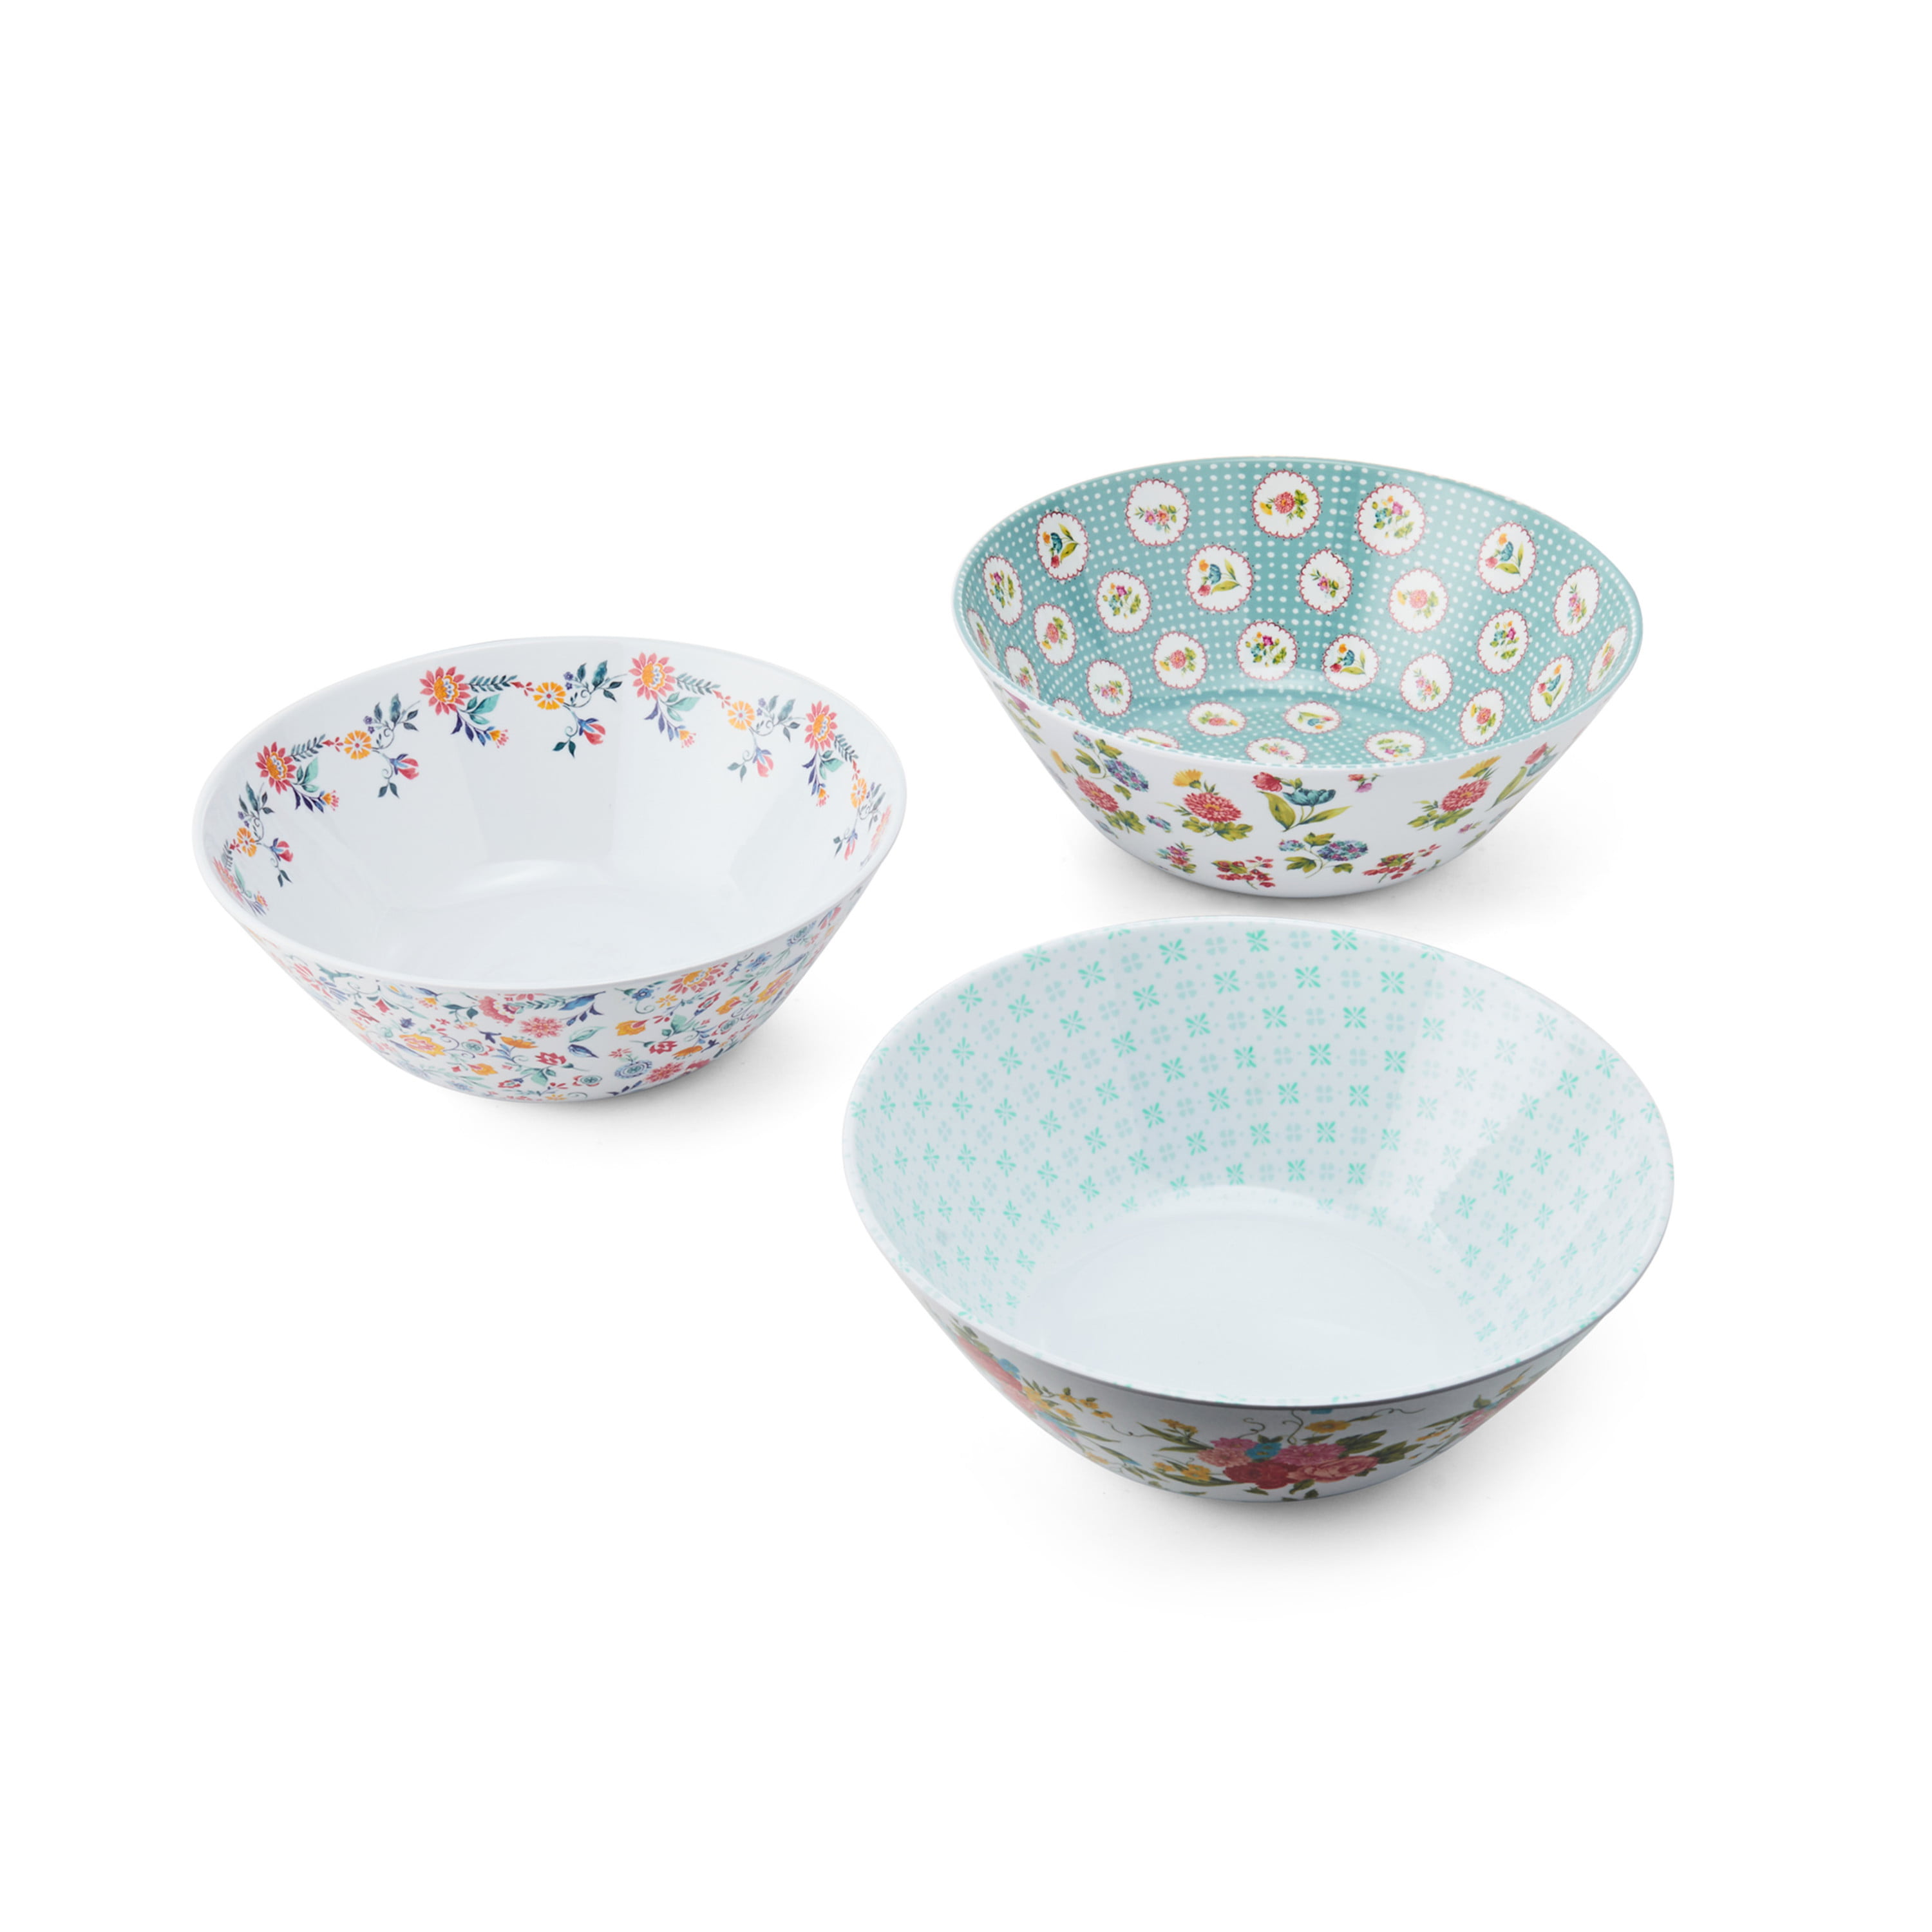 NEW PIONEER WOMAN COUNTRY SPLATTER SALAD BOWL AND UTENSILS 3 PIECE